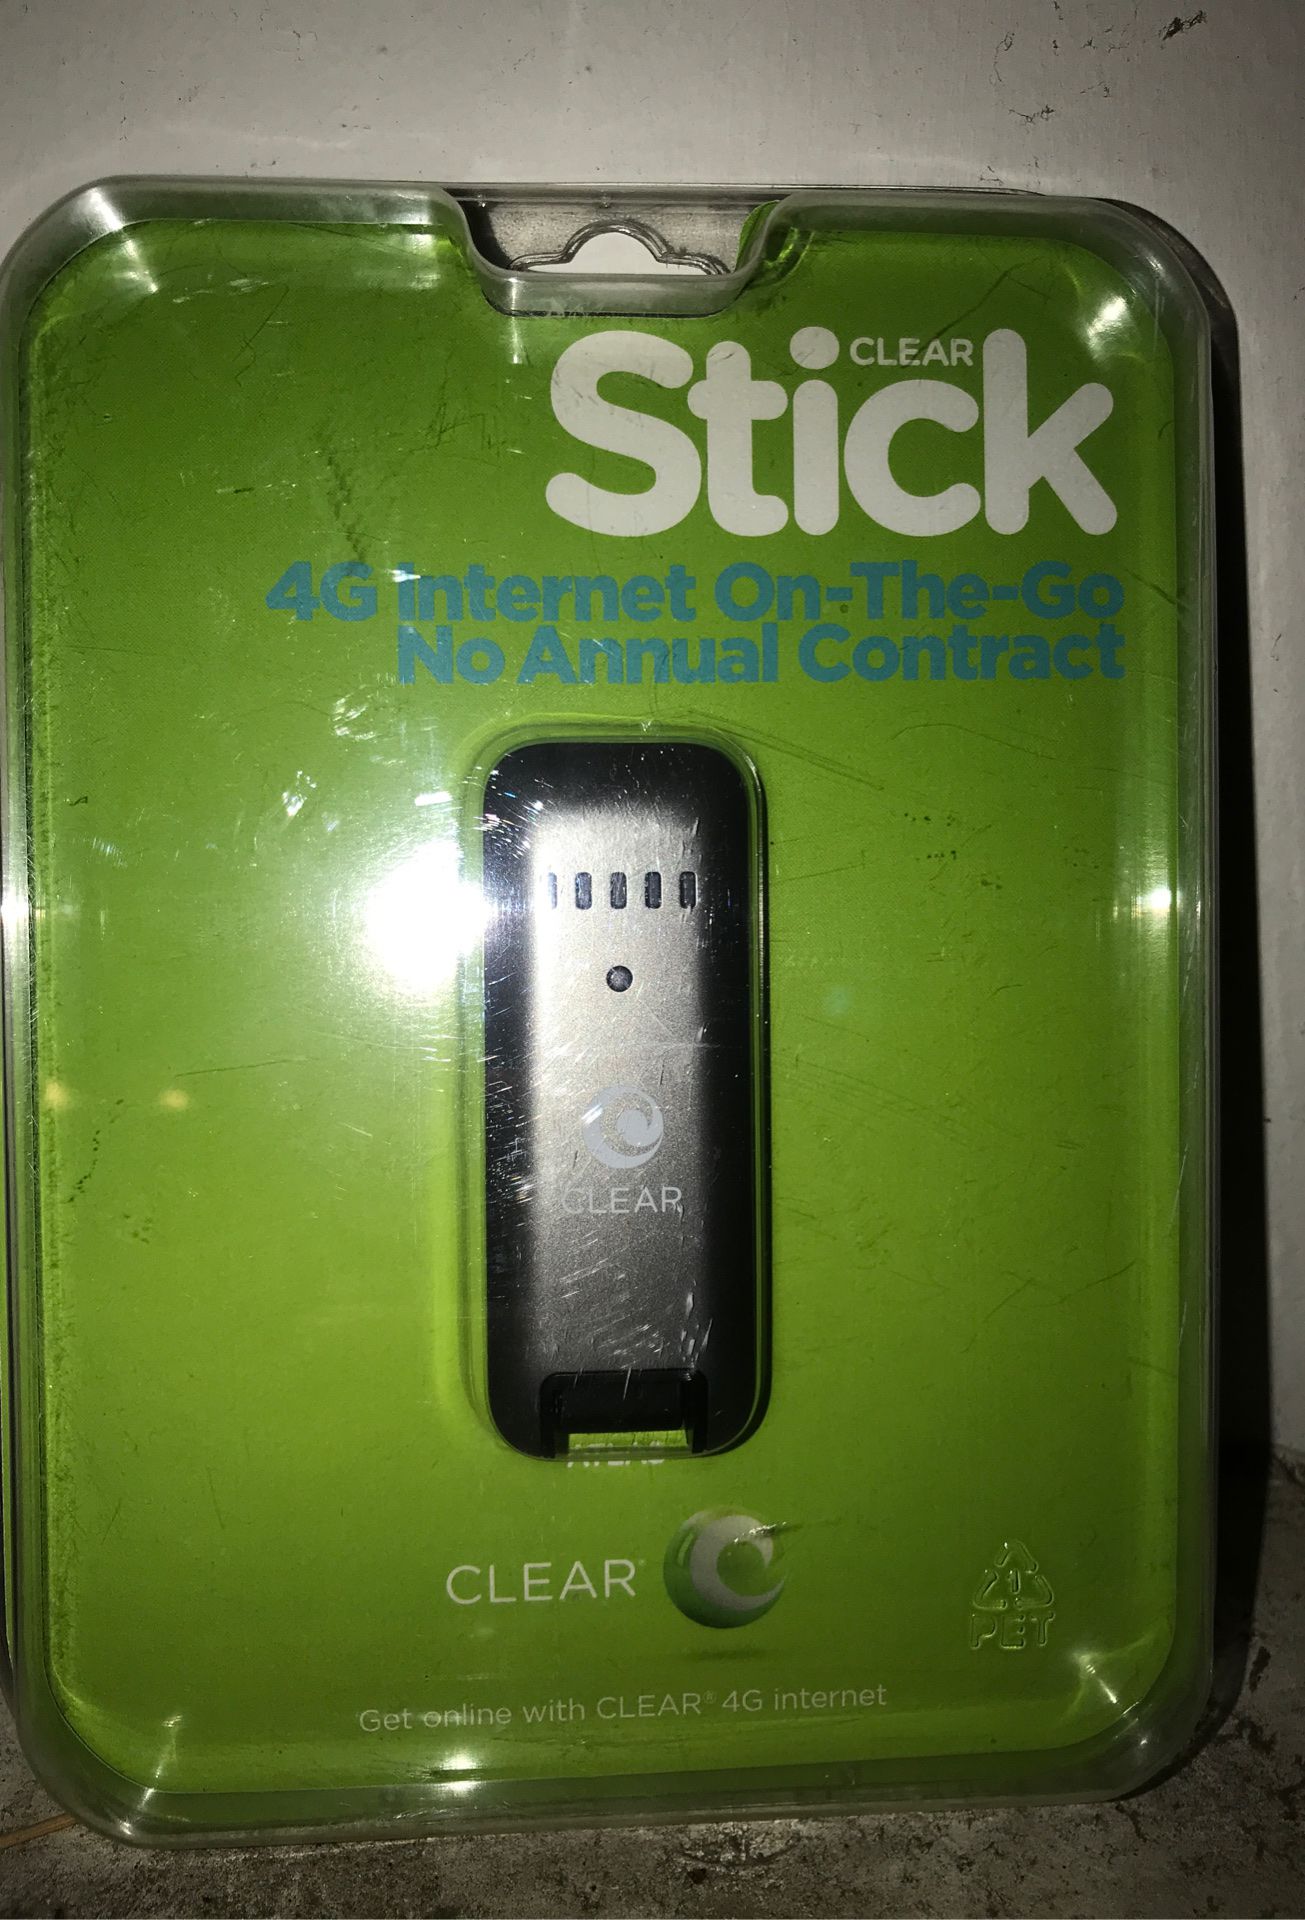 Clear stick 4g internet on the go